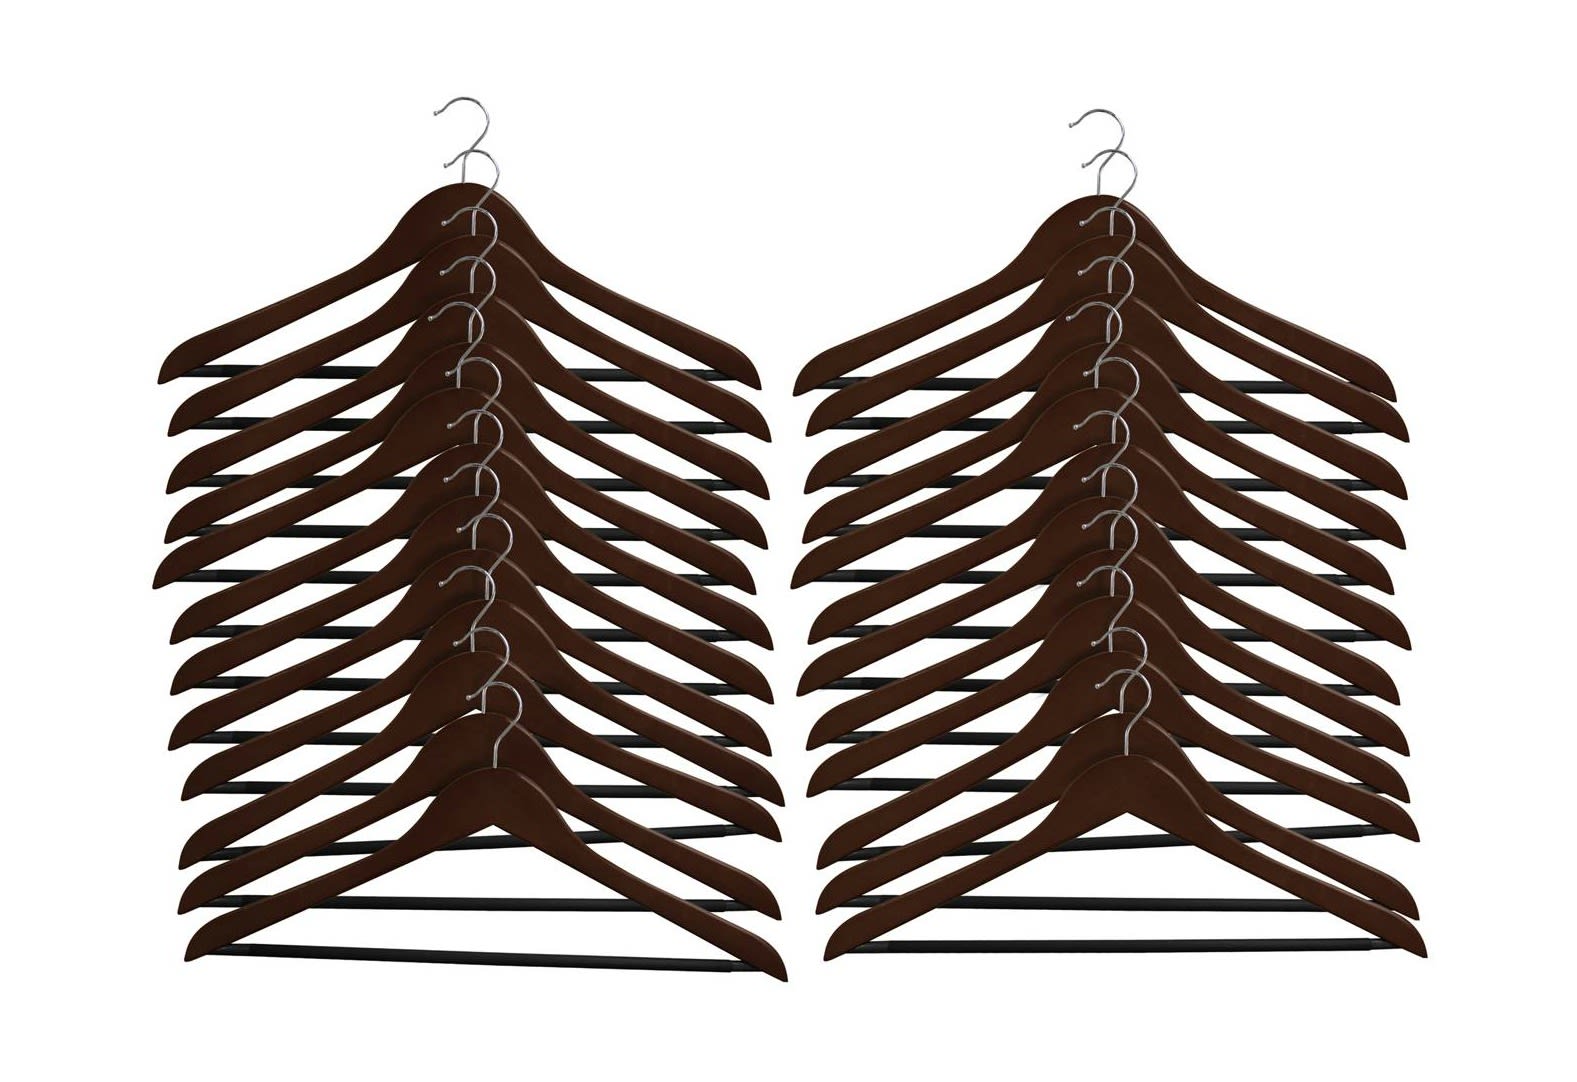 Cheap Thrills: Where To Buy Lots of Wooden Hangers